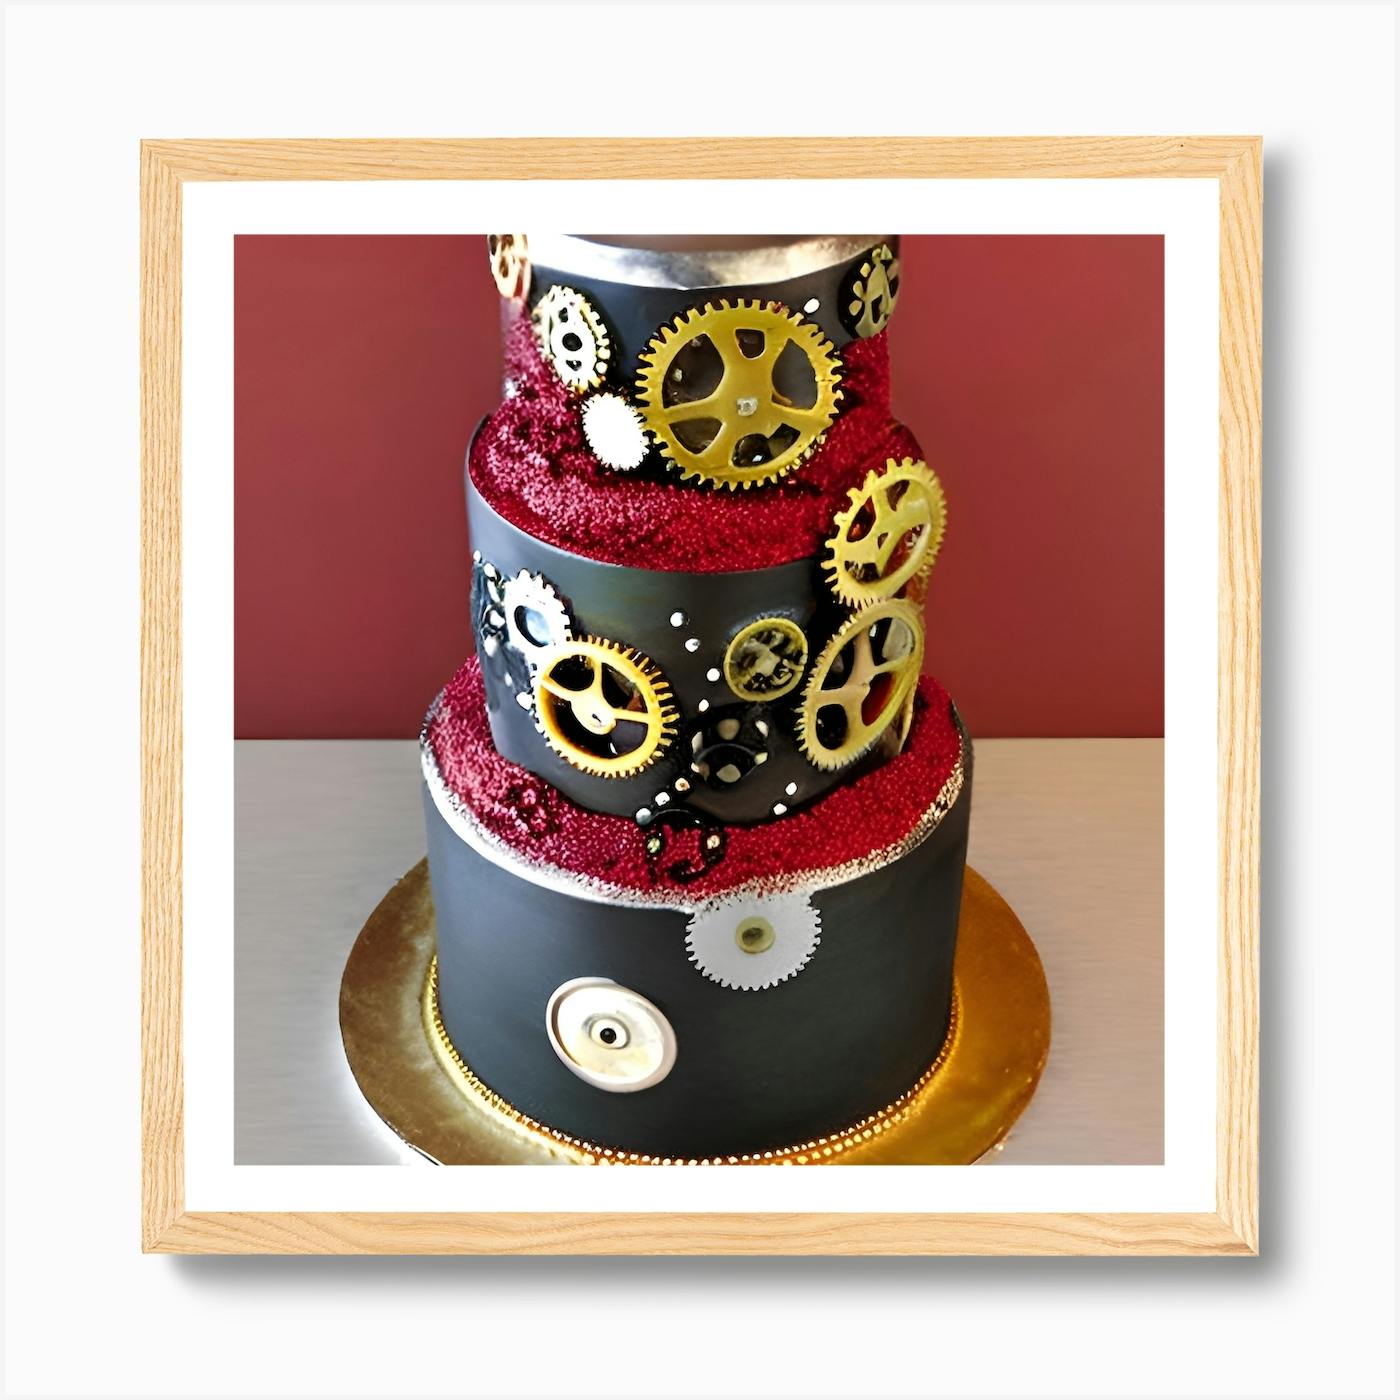 Steampunk cake for a friend : r/cakedecorating